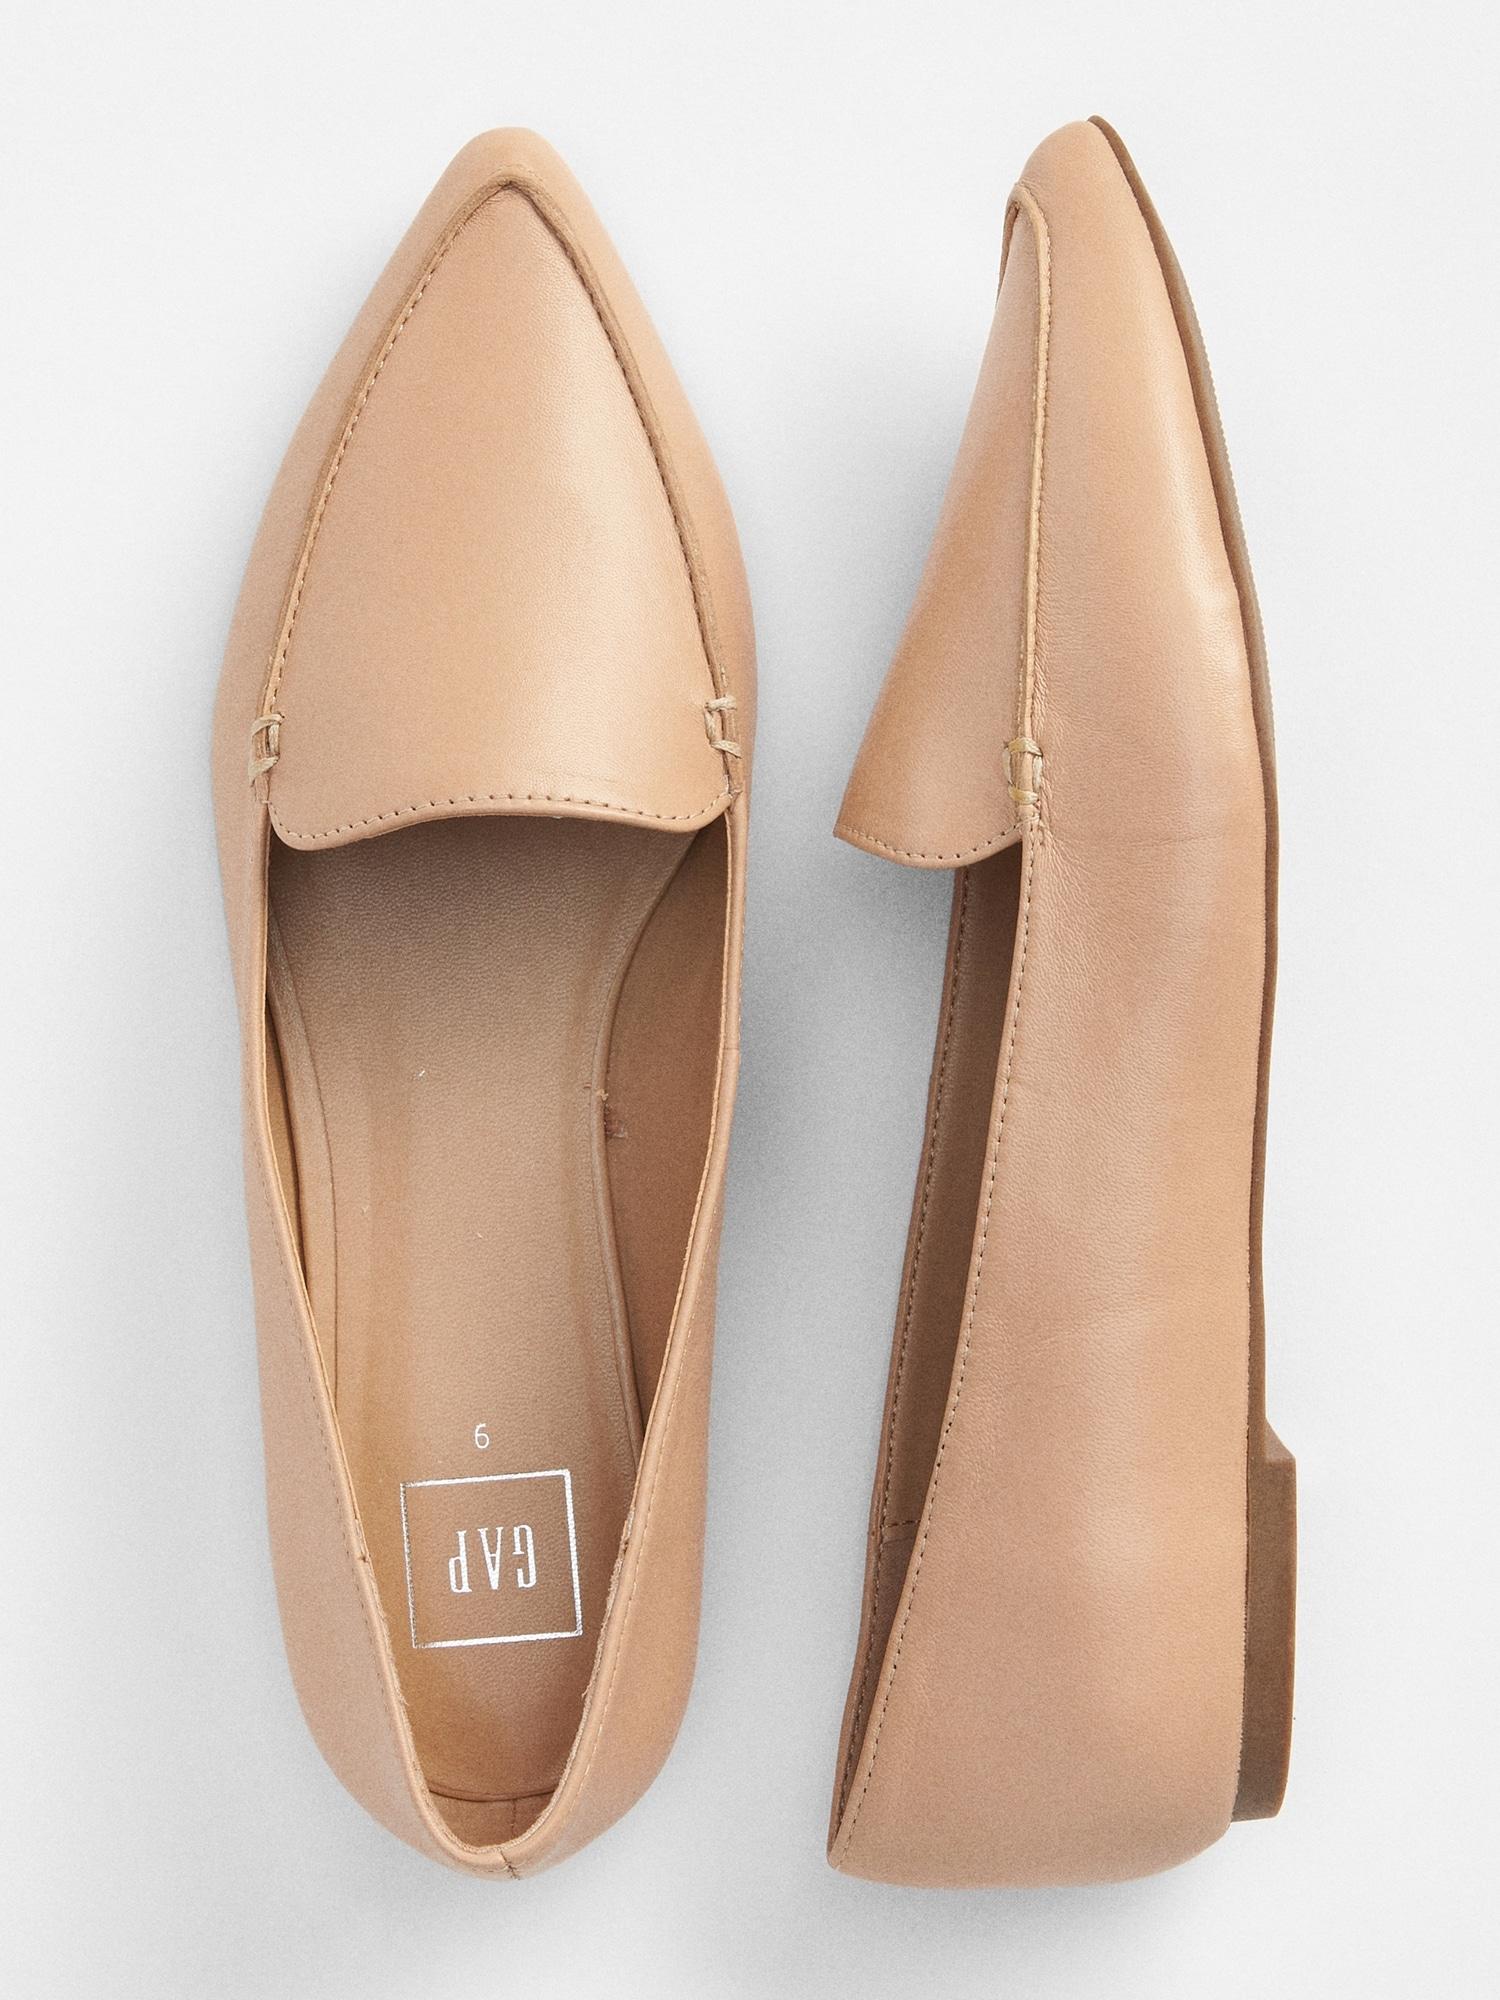 gap leather pointed loafers